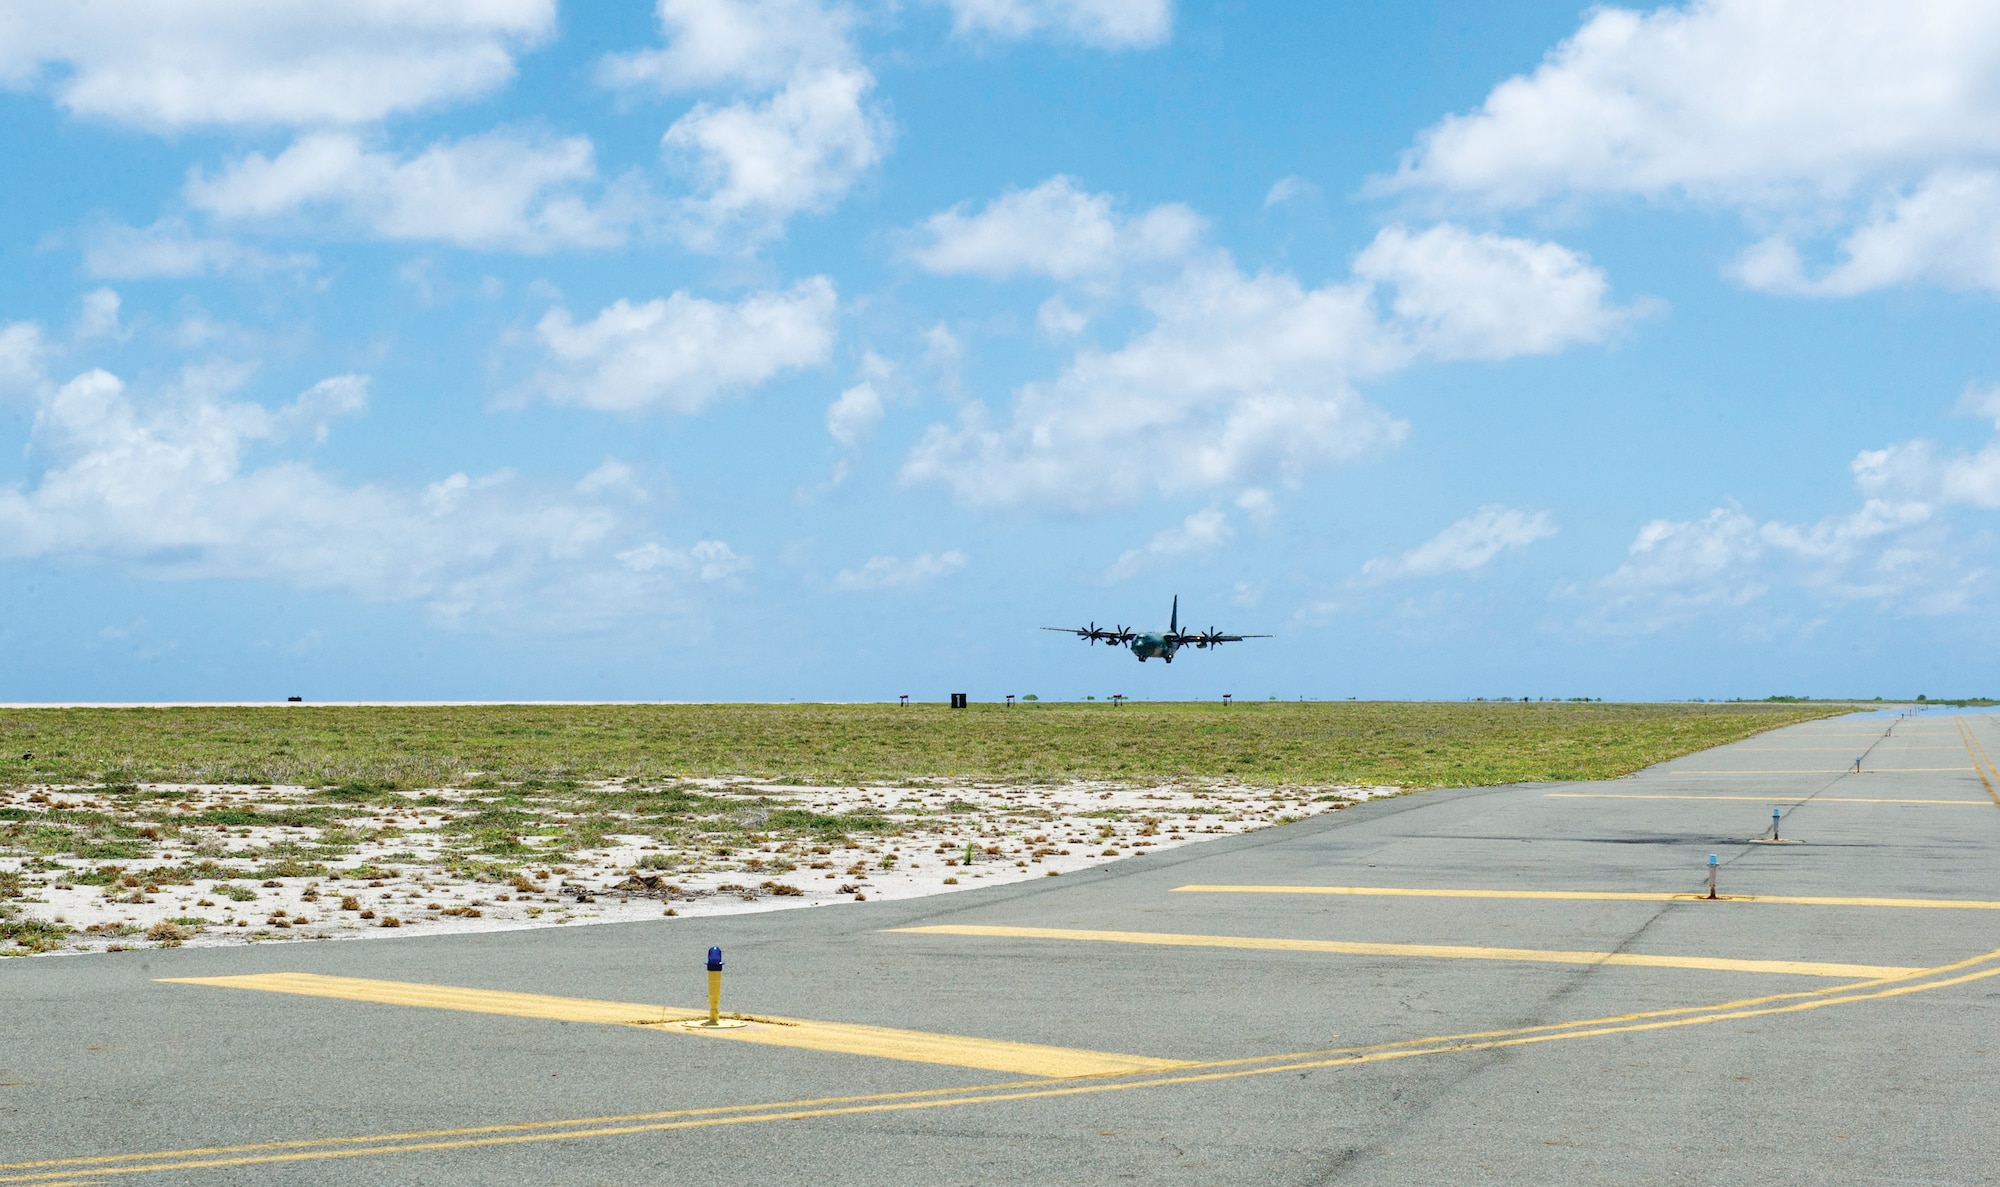 A Republic of Korea Air Force C-130J Super Hercules lands at Wake Island Airfield in the mid-Pacific June 3, 2016. The airfield supports an average of 600 aircraft sorties annually, many of them cross-Pacific missions for propeller-driven aircraft from all branches of the U.S. military and its allied partners. Wake Island is more than 600 miles from the next-closest runway in the Pacific.